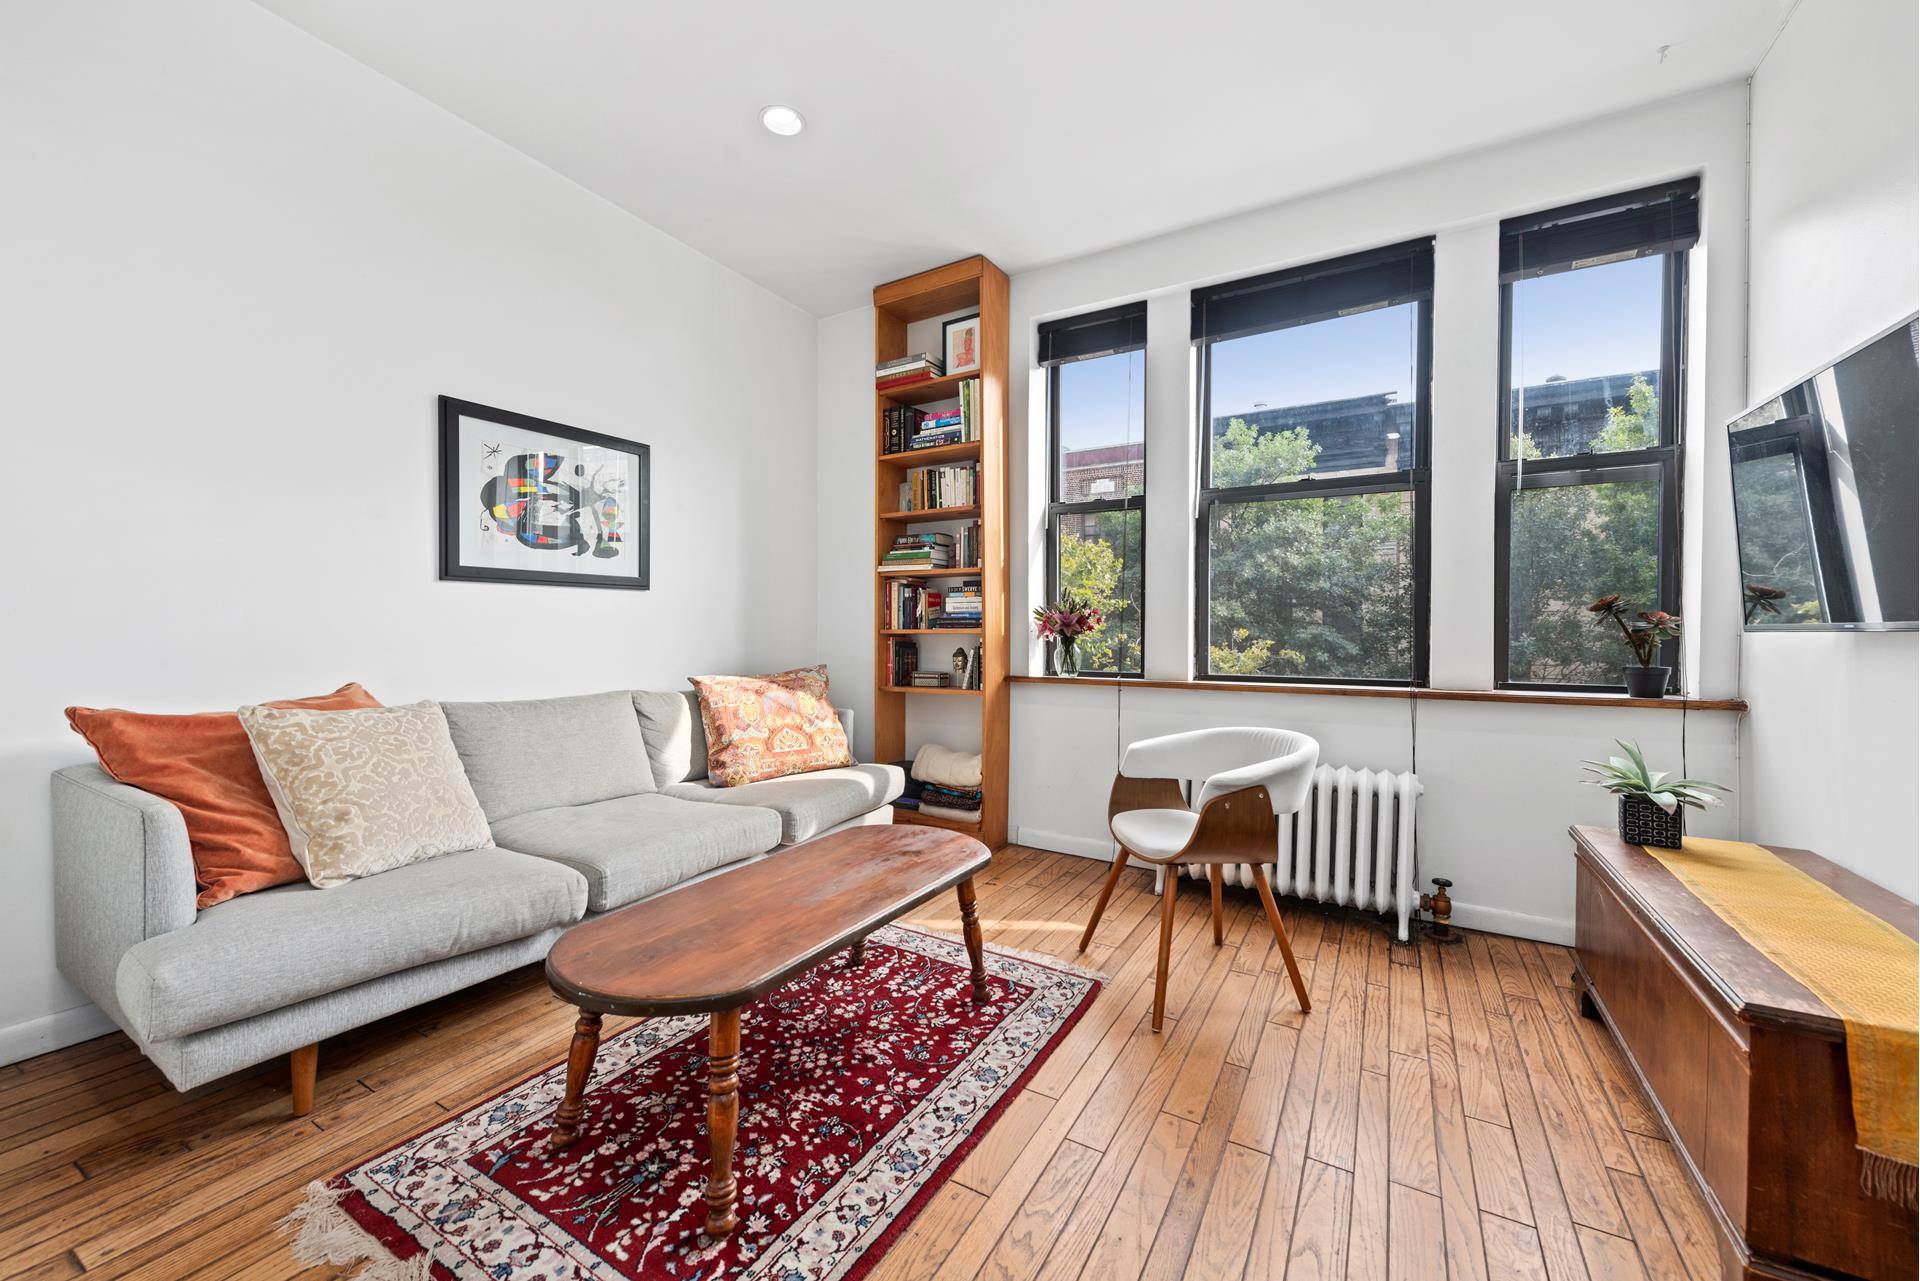 One bedroom, one bath apartment with great light in perfect Park Slope location, just off the entrance to Prospect Park at Grand Army Plaza.